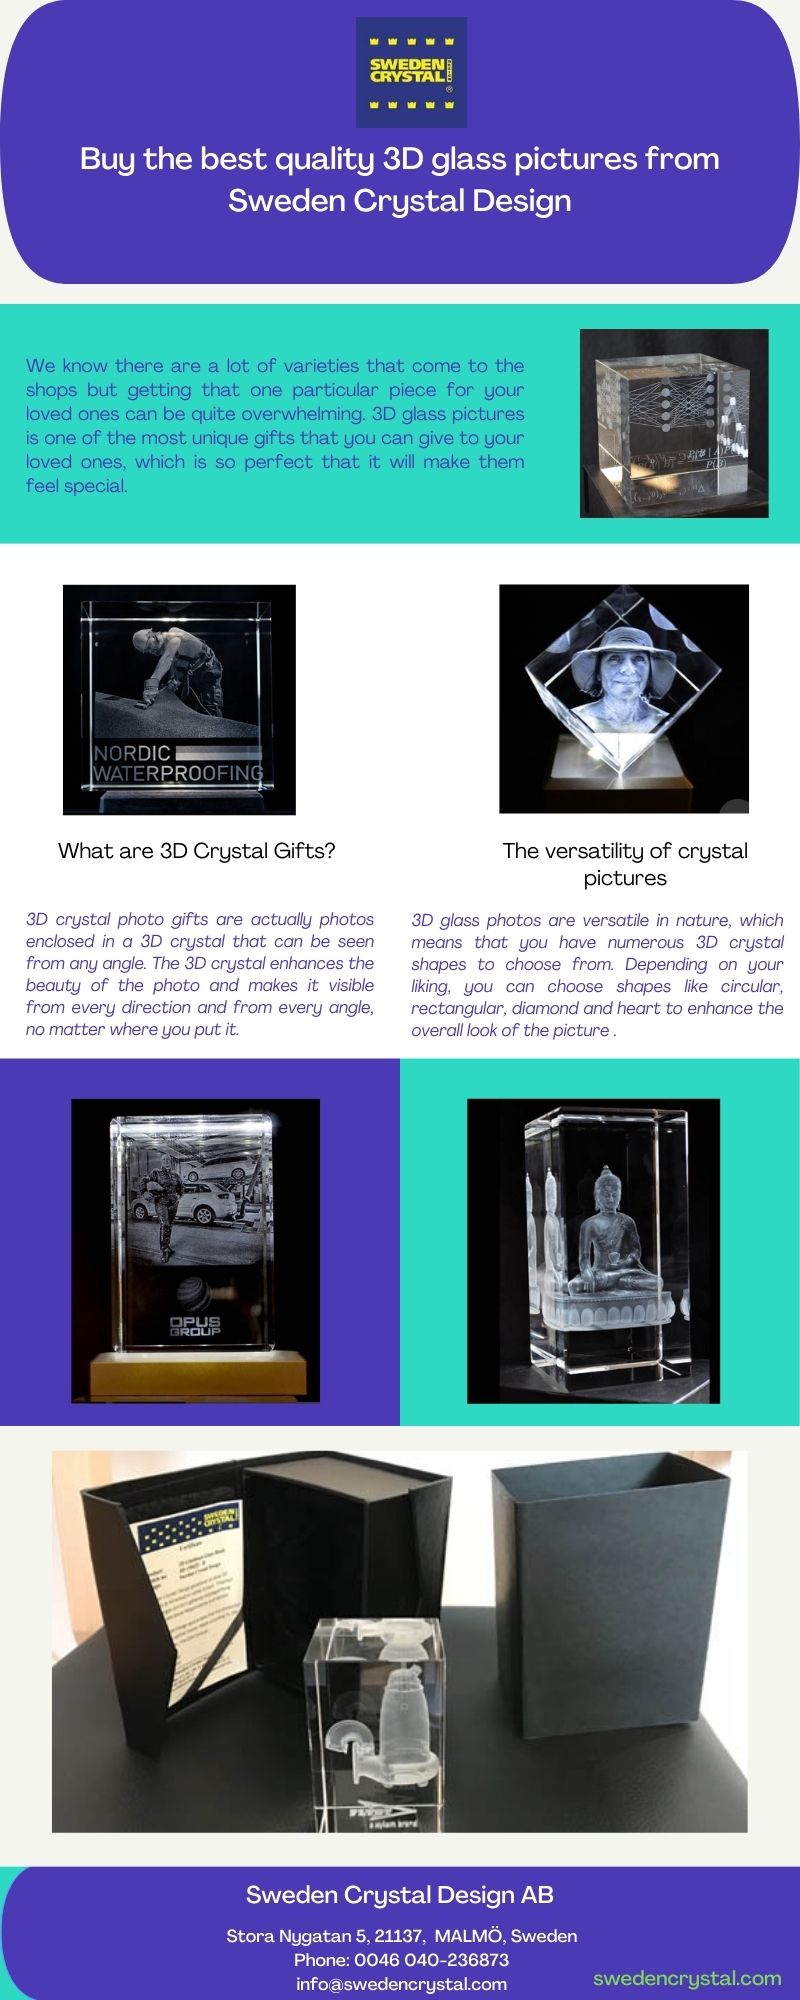 Buy the best quality 3D glass pictures from Sweden Crystal Design 3D crystal engraving glass pictures from Sweden Crystal Design - Personalized 3D gifts for your loved ones in the shapes of squares, hearts, diamonds and many more. For more details, visit: https://swedencrystal.com/custom-designed-glass-block/ by Swedencrystal1